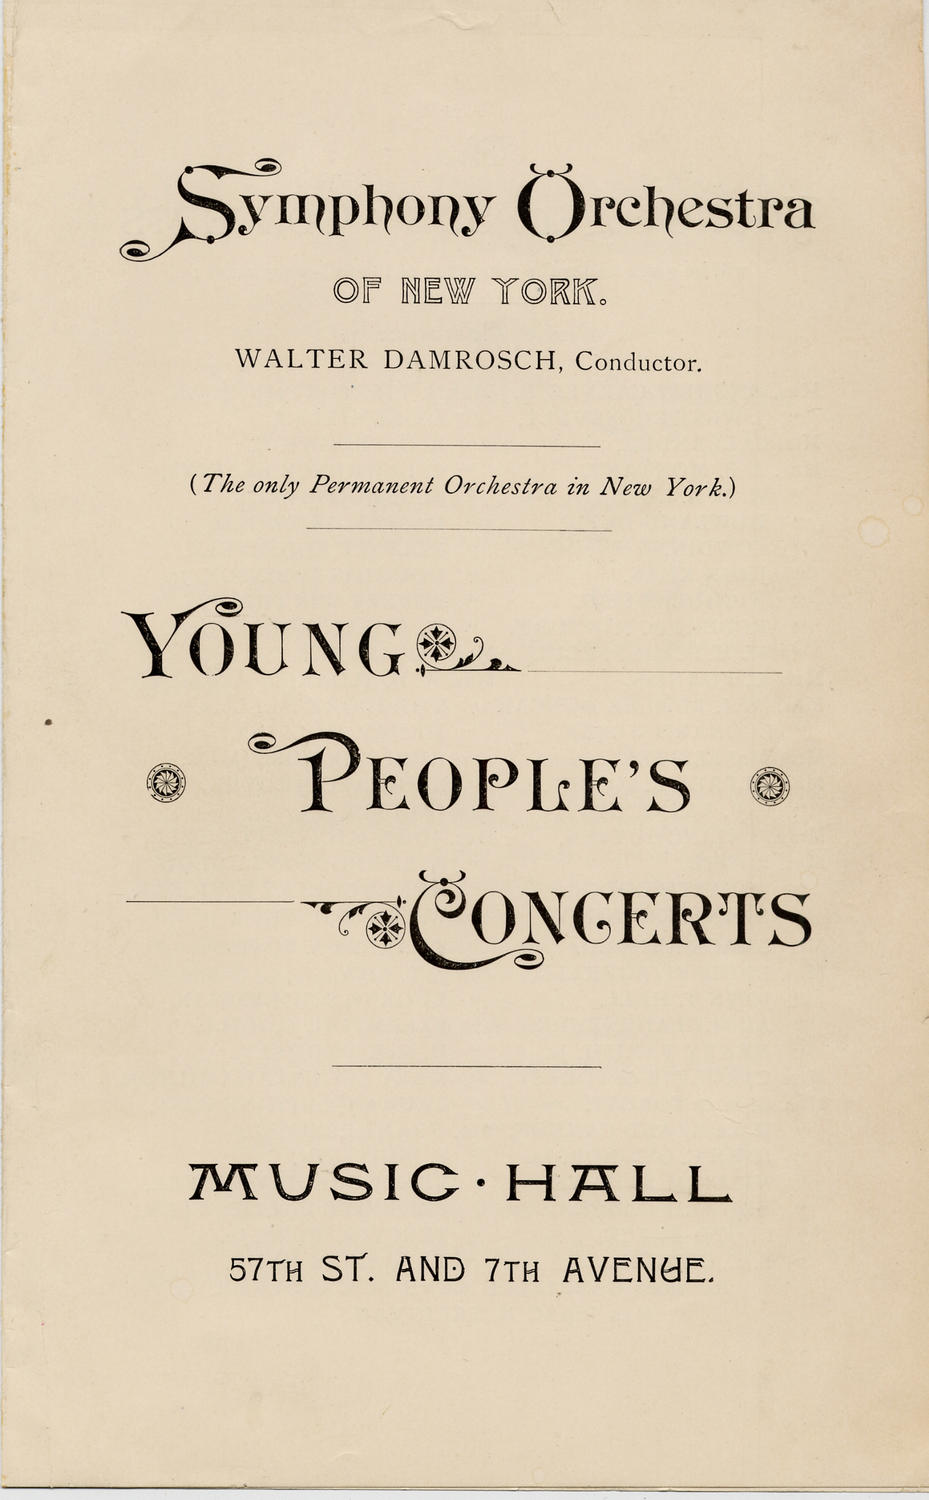 Young People's Concert, December 30, 1891